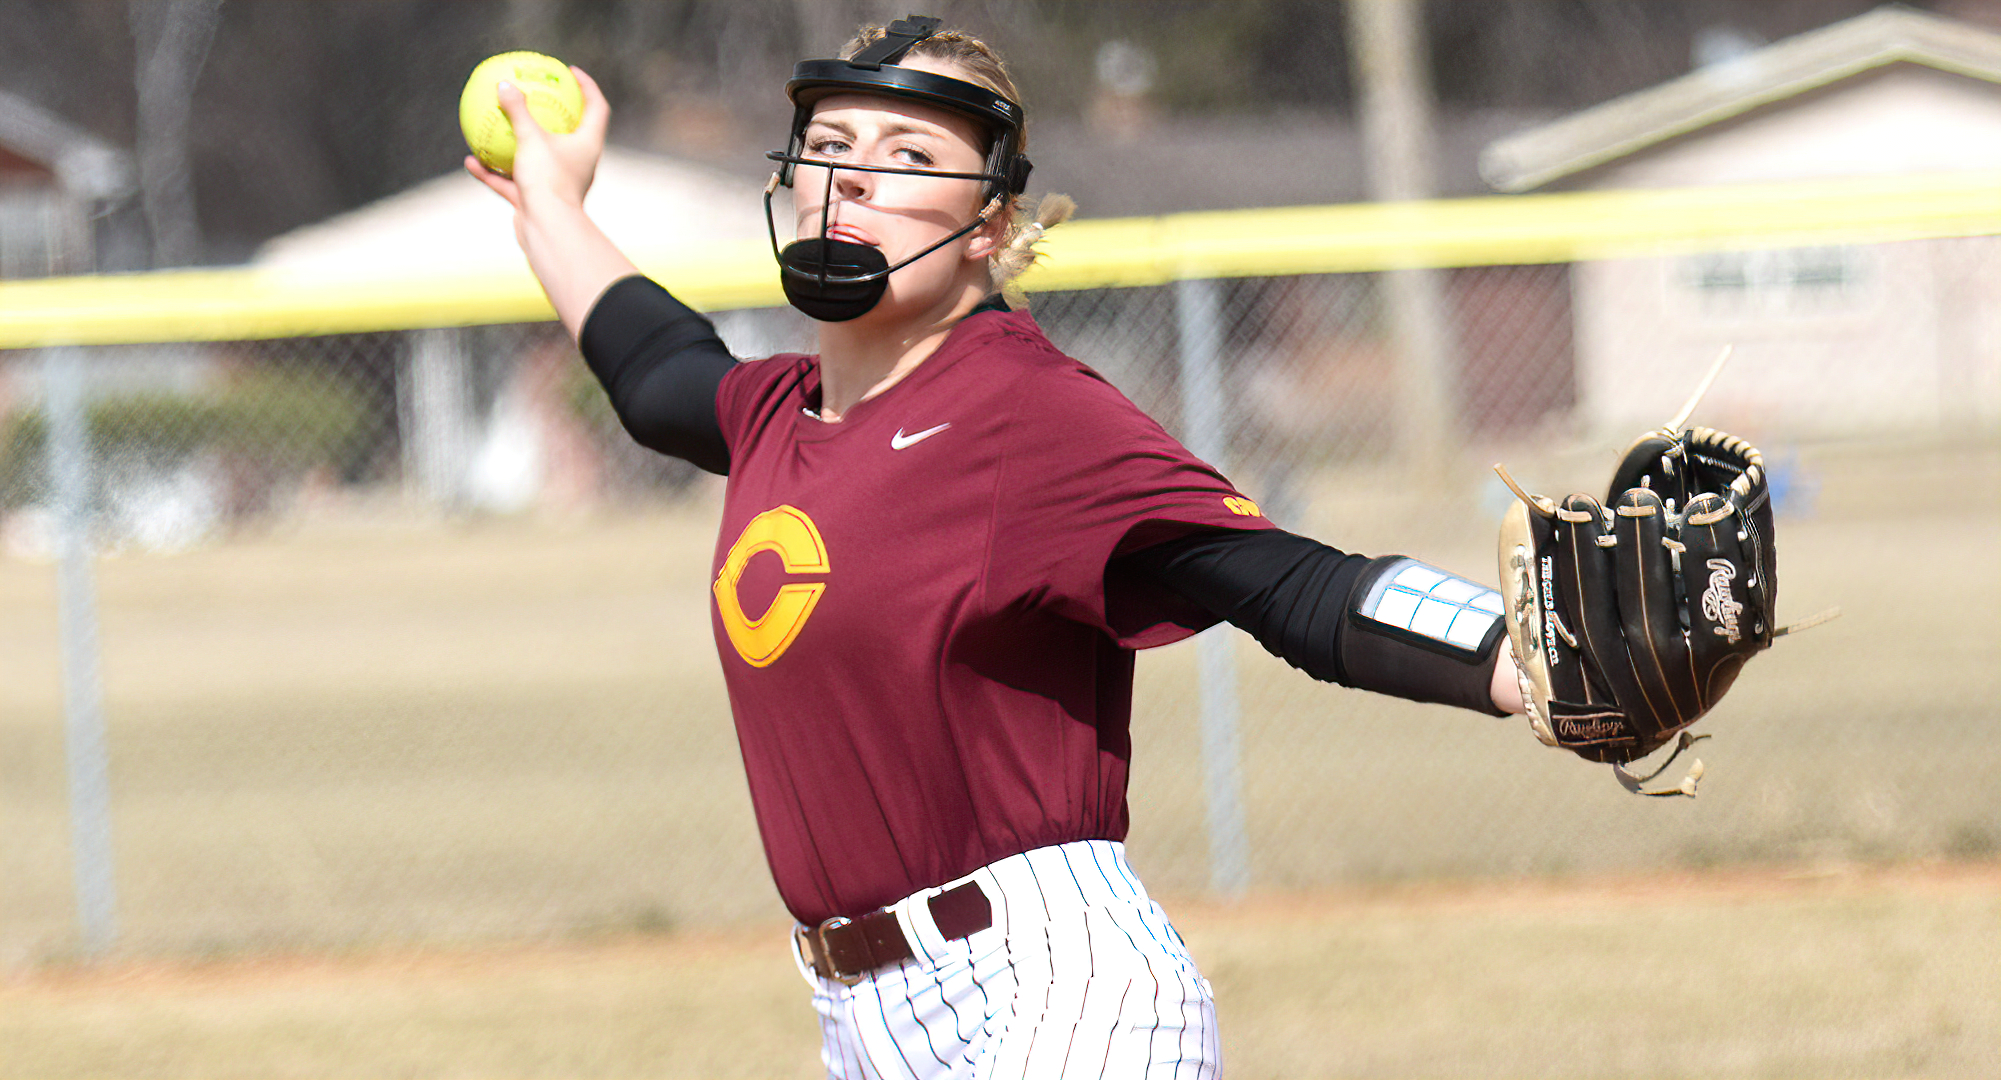 Senior Karissa Finnigan threw a complete-game, 6-hit shutout in the Cobbers series-opening win over UM-Morris.